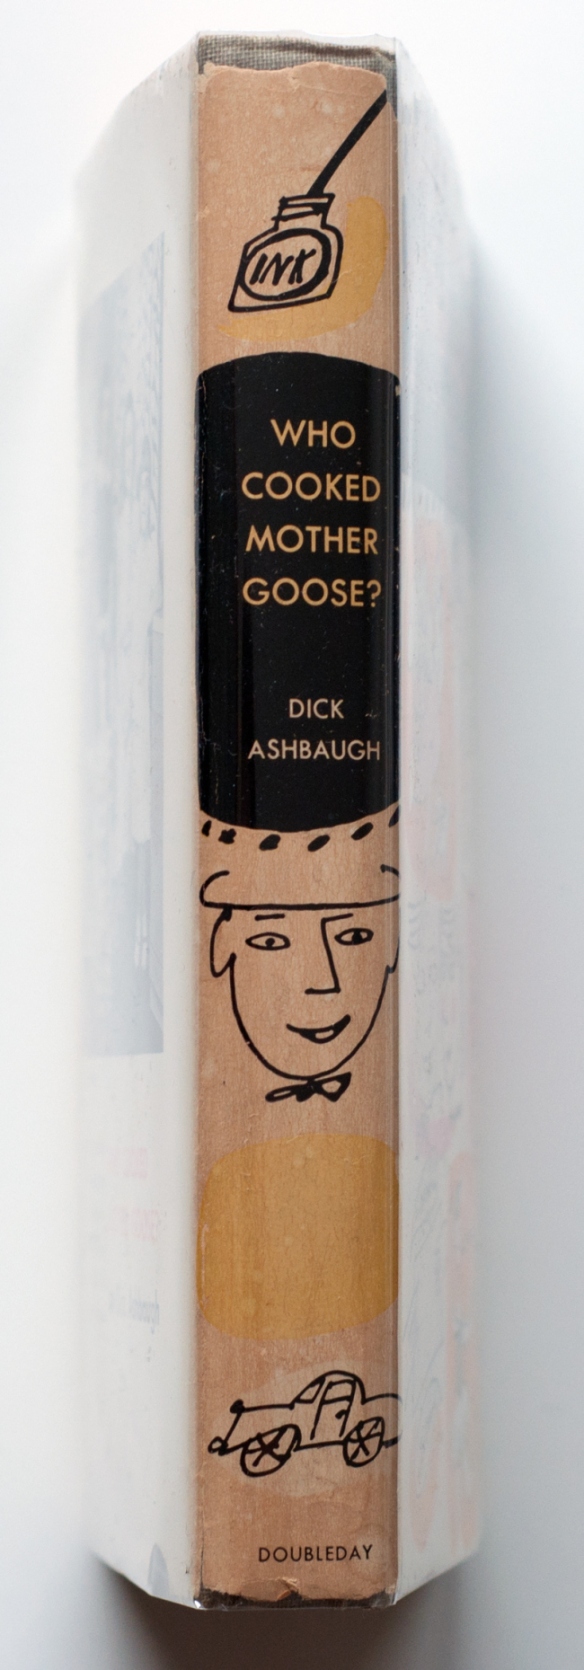 Who-Cooked-Mother-Goose-Warhol-3